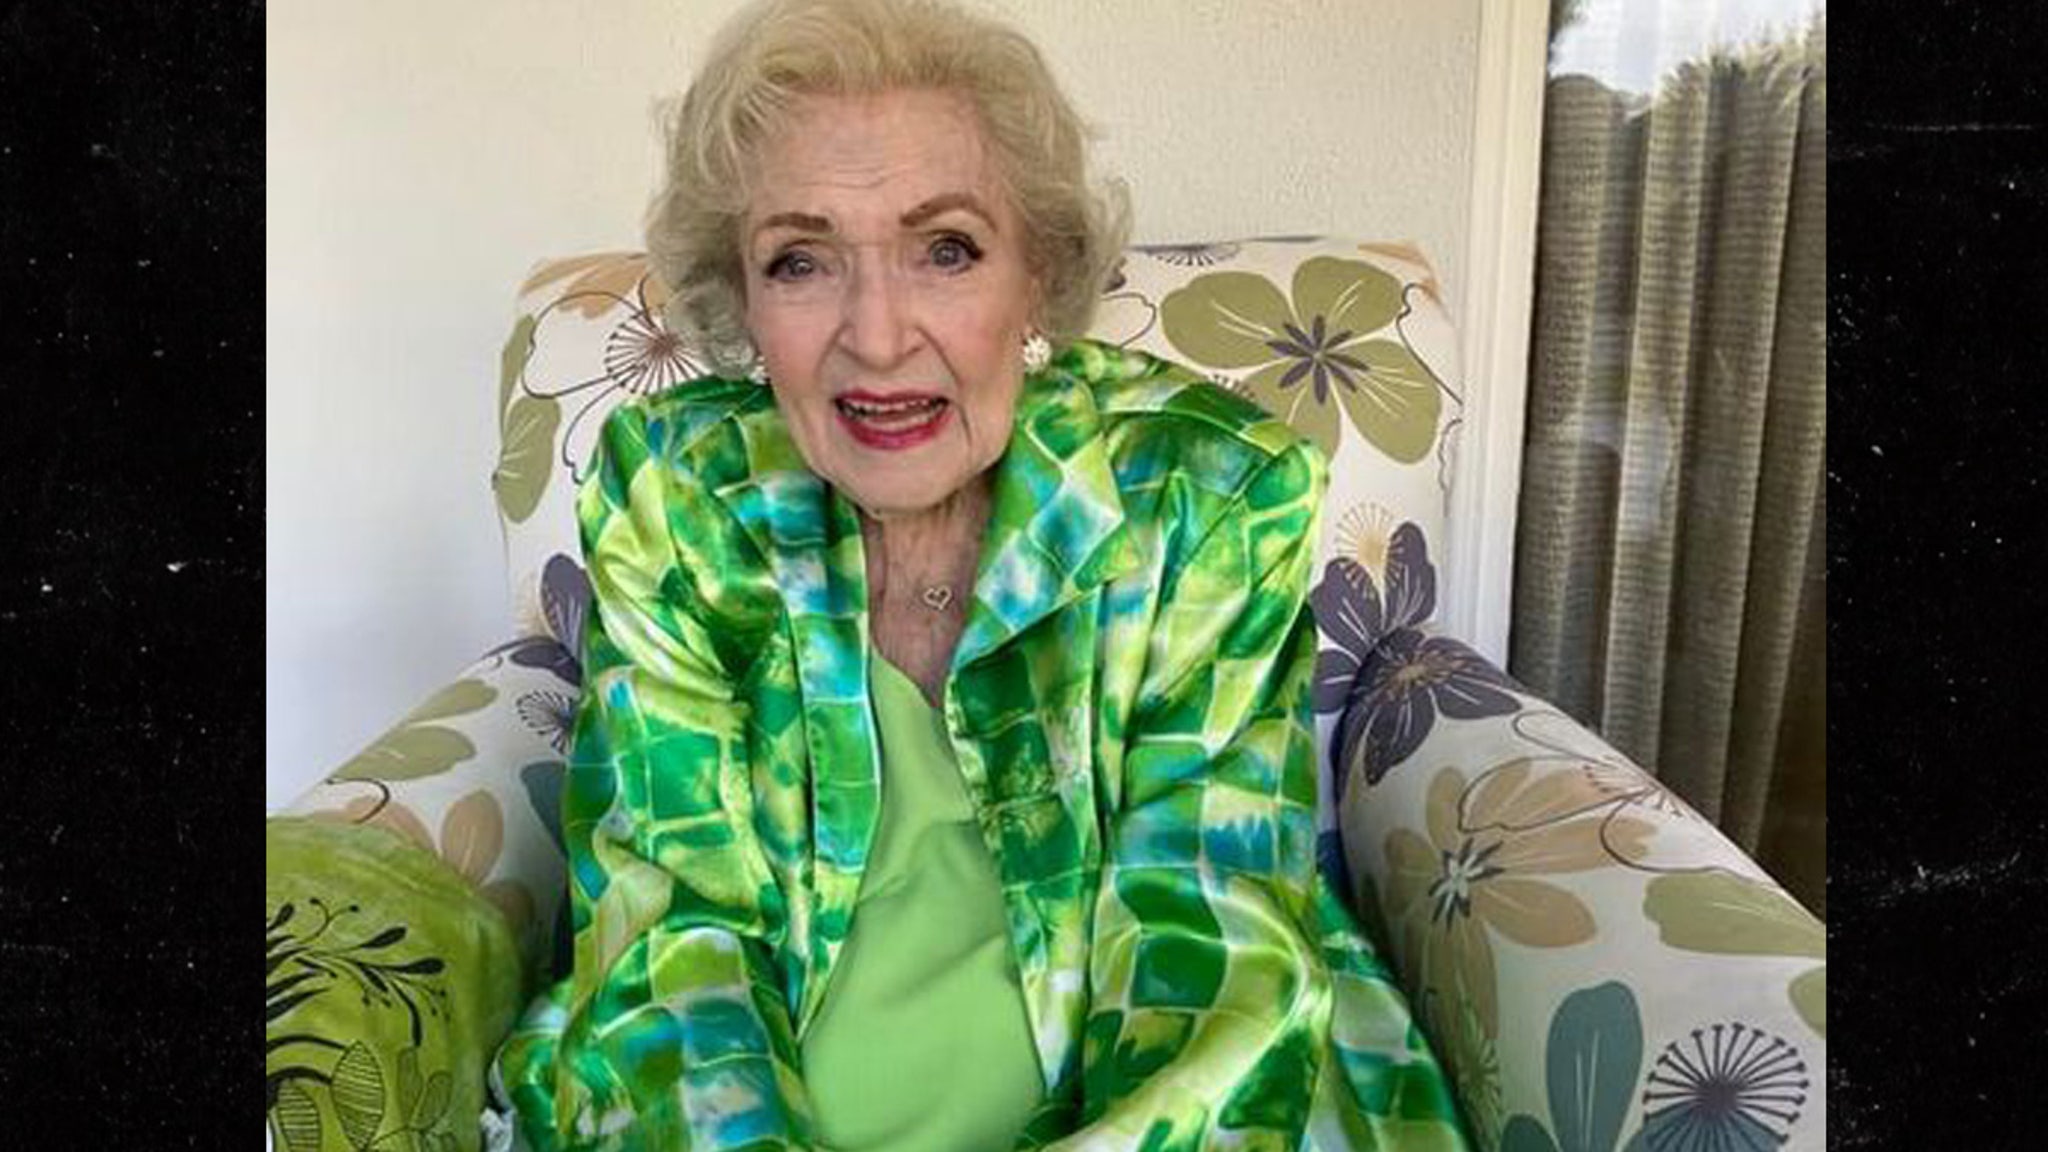 Betty White's Assistant Posts One of the Last Photographs of Her Before Death